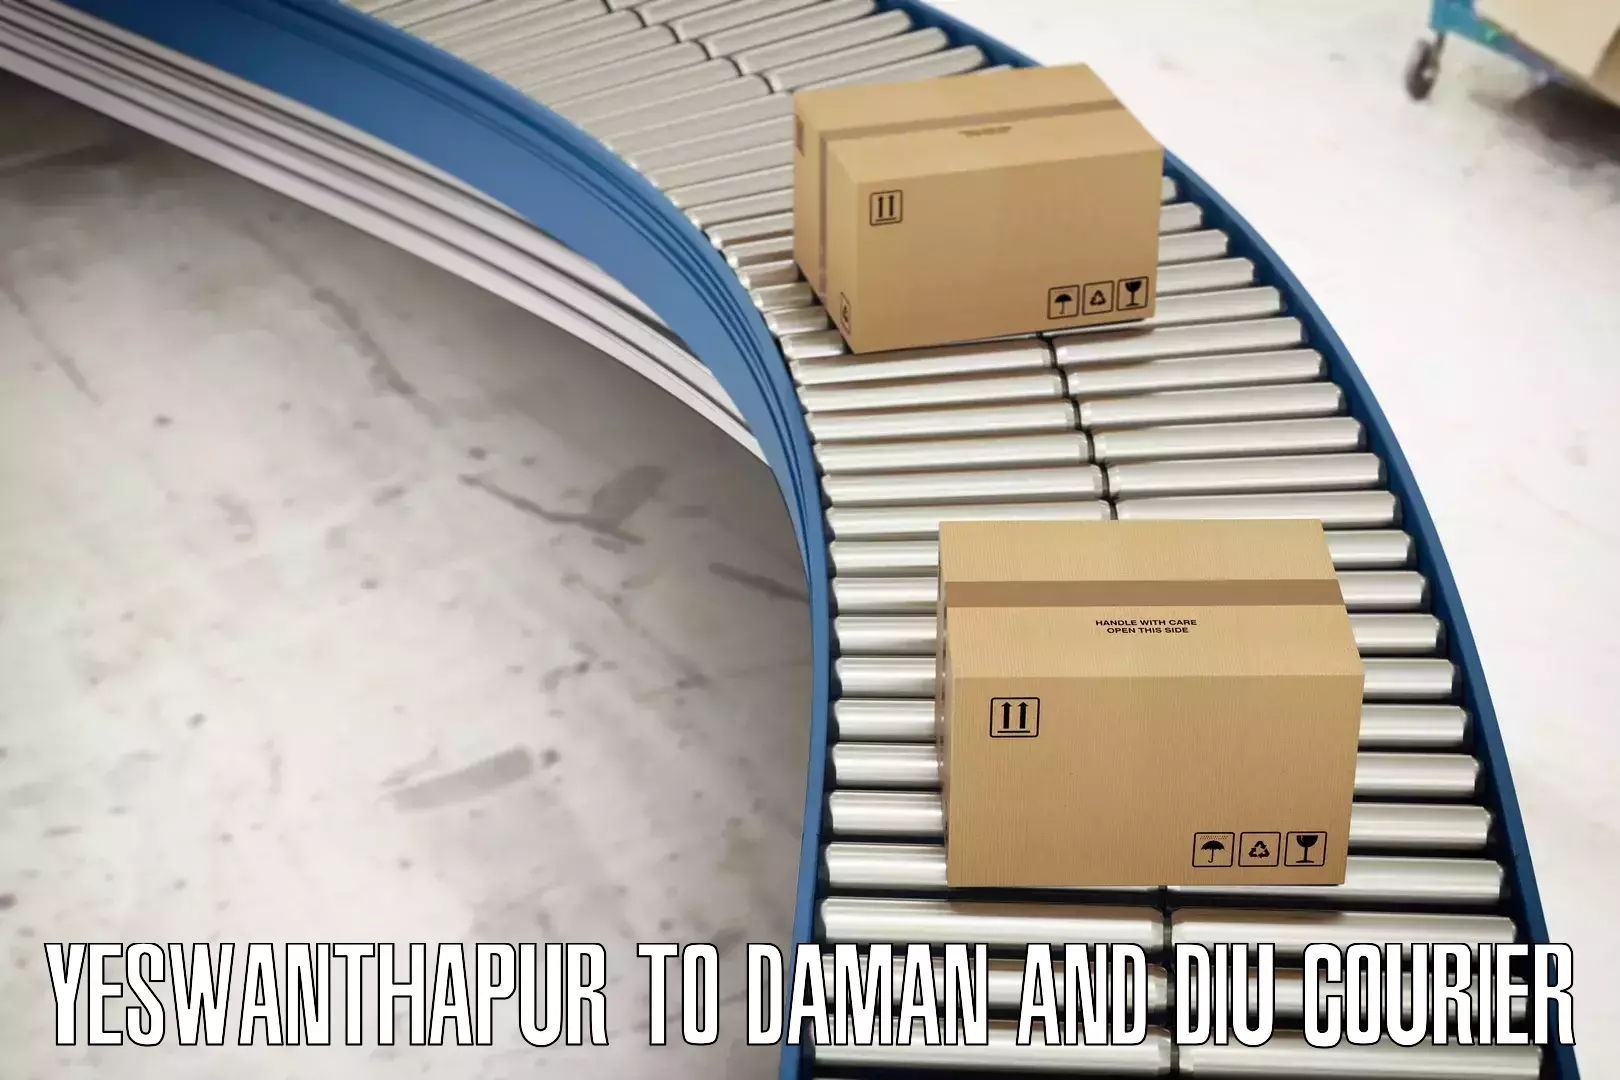 Smart parcel tracking Yeswanthapur to Daman and Diu